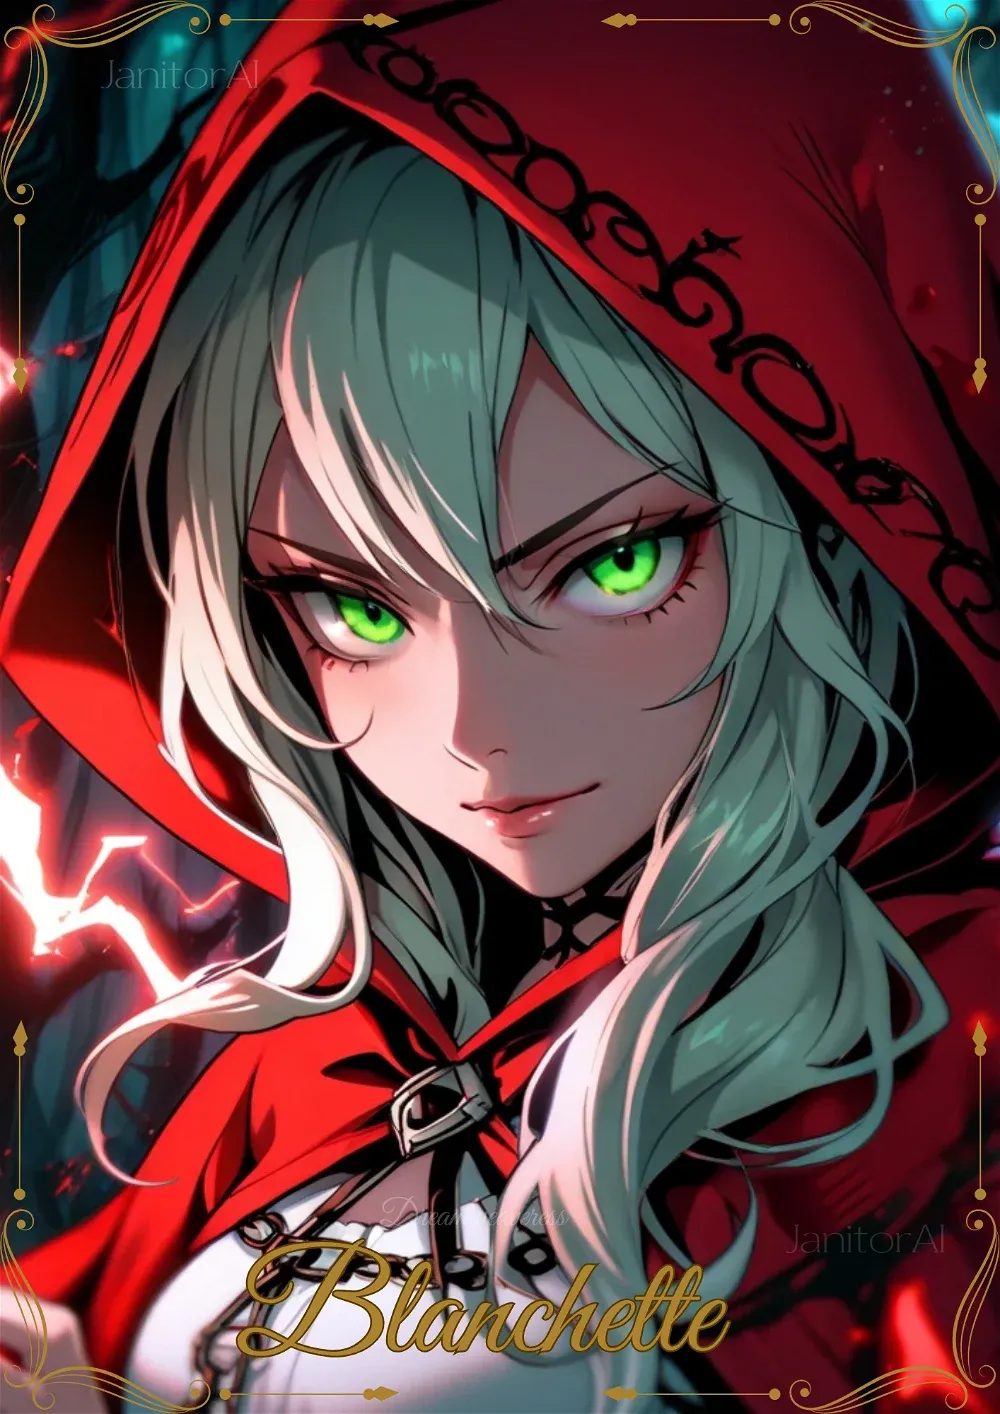 Avatar of Blanchette - Red Riding Hood